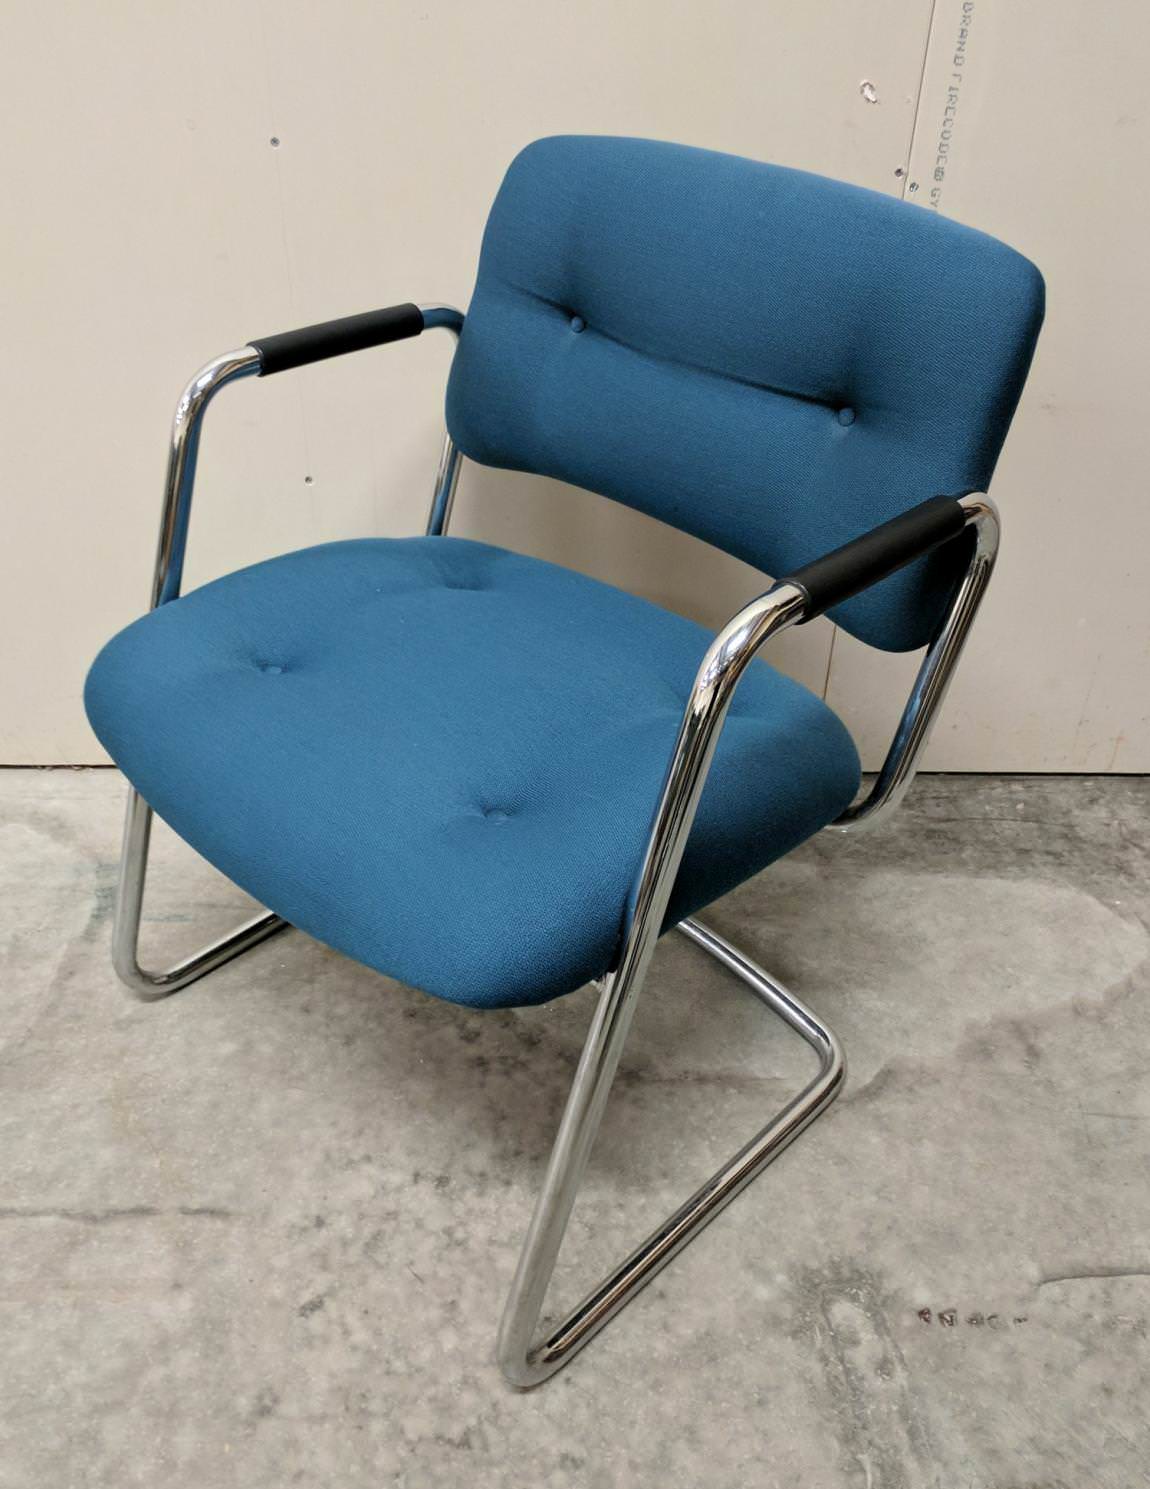 Steelcase Teal Guest Chairs